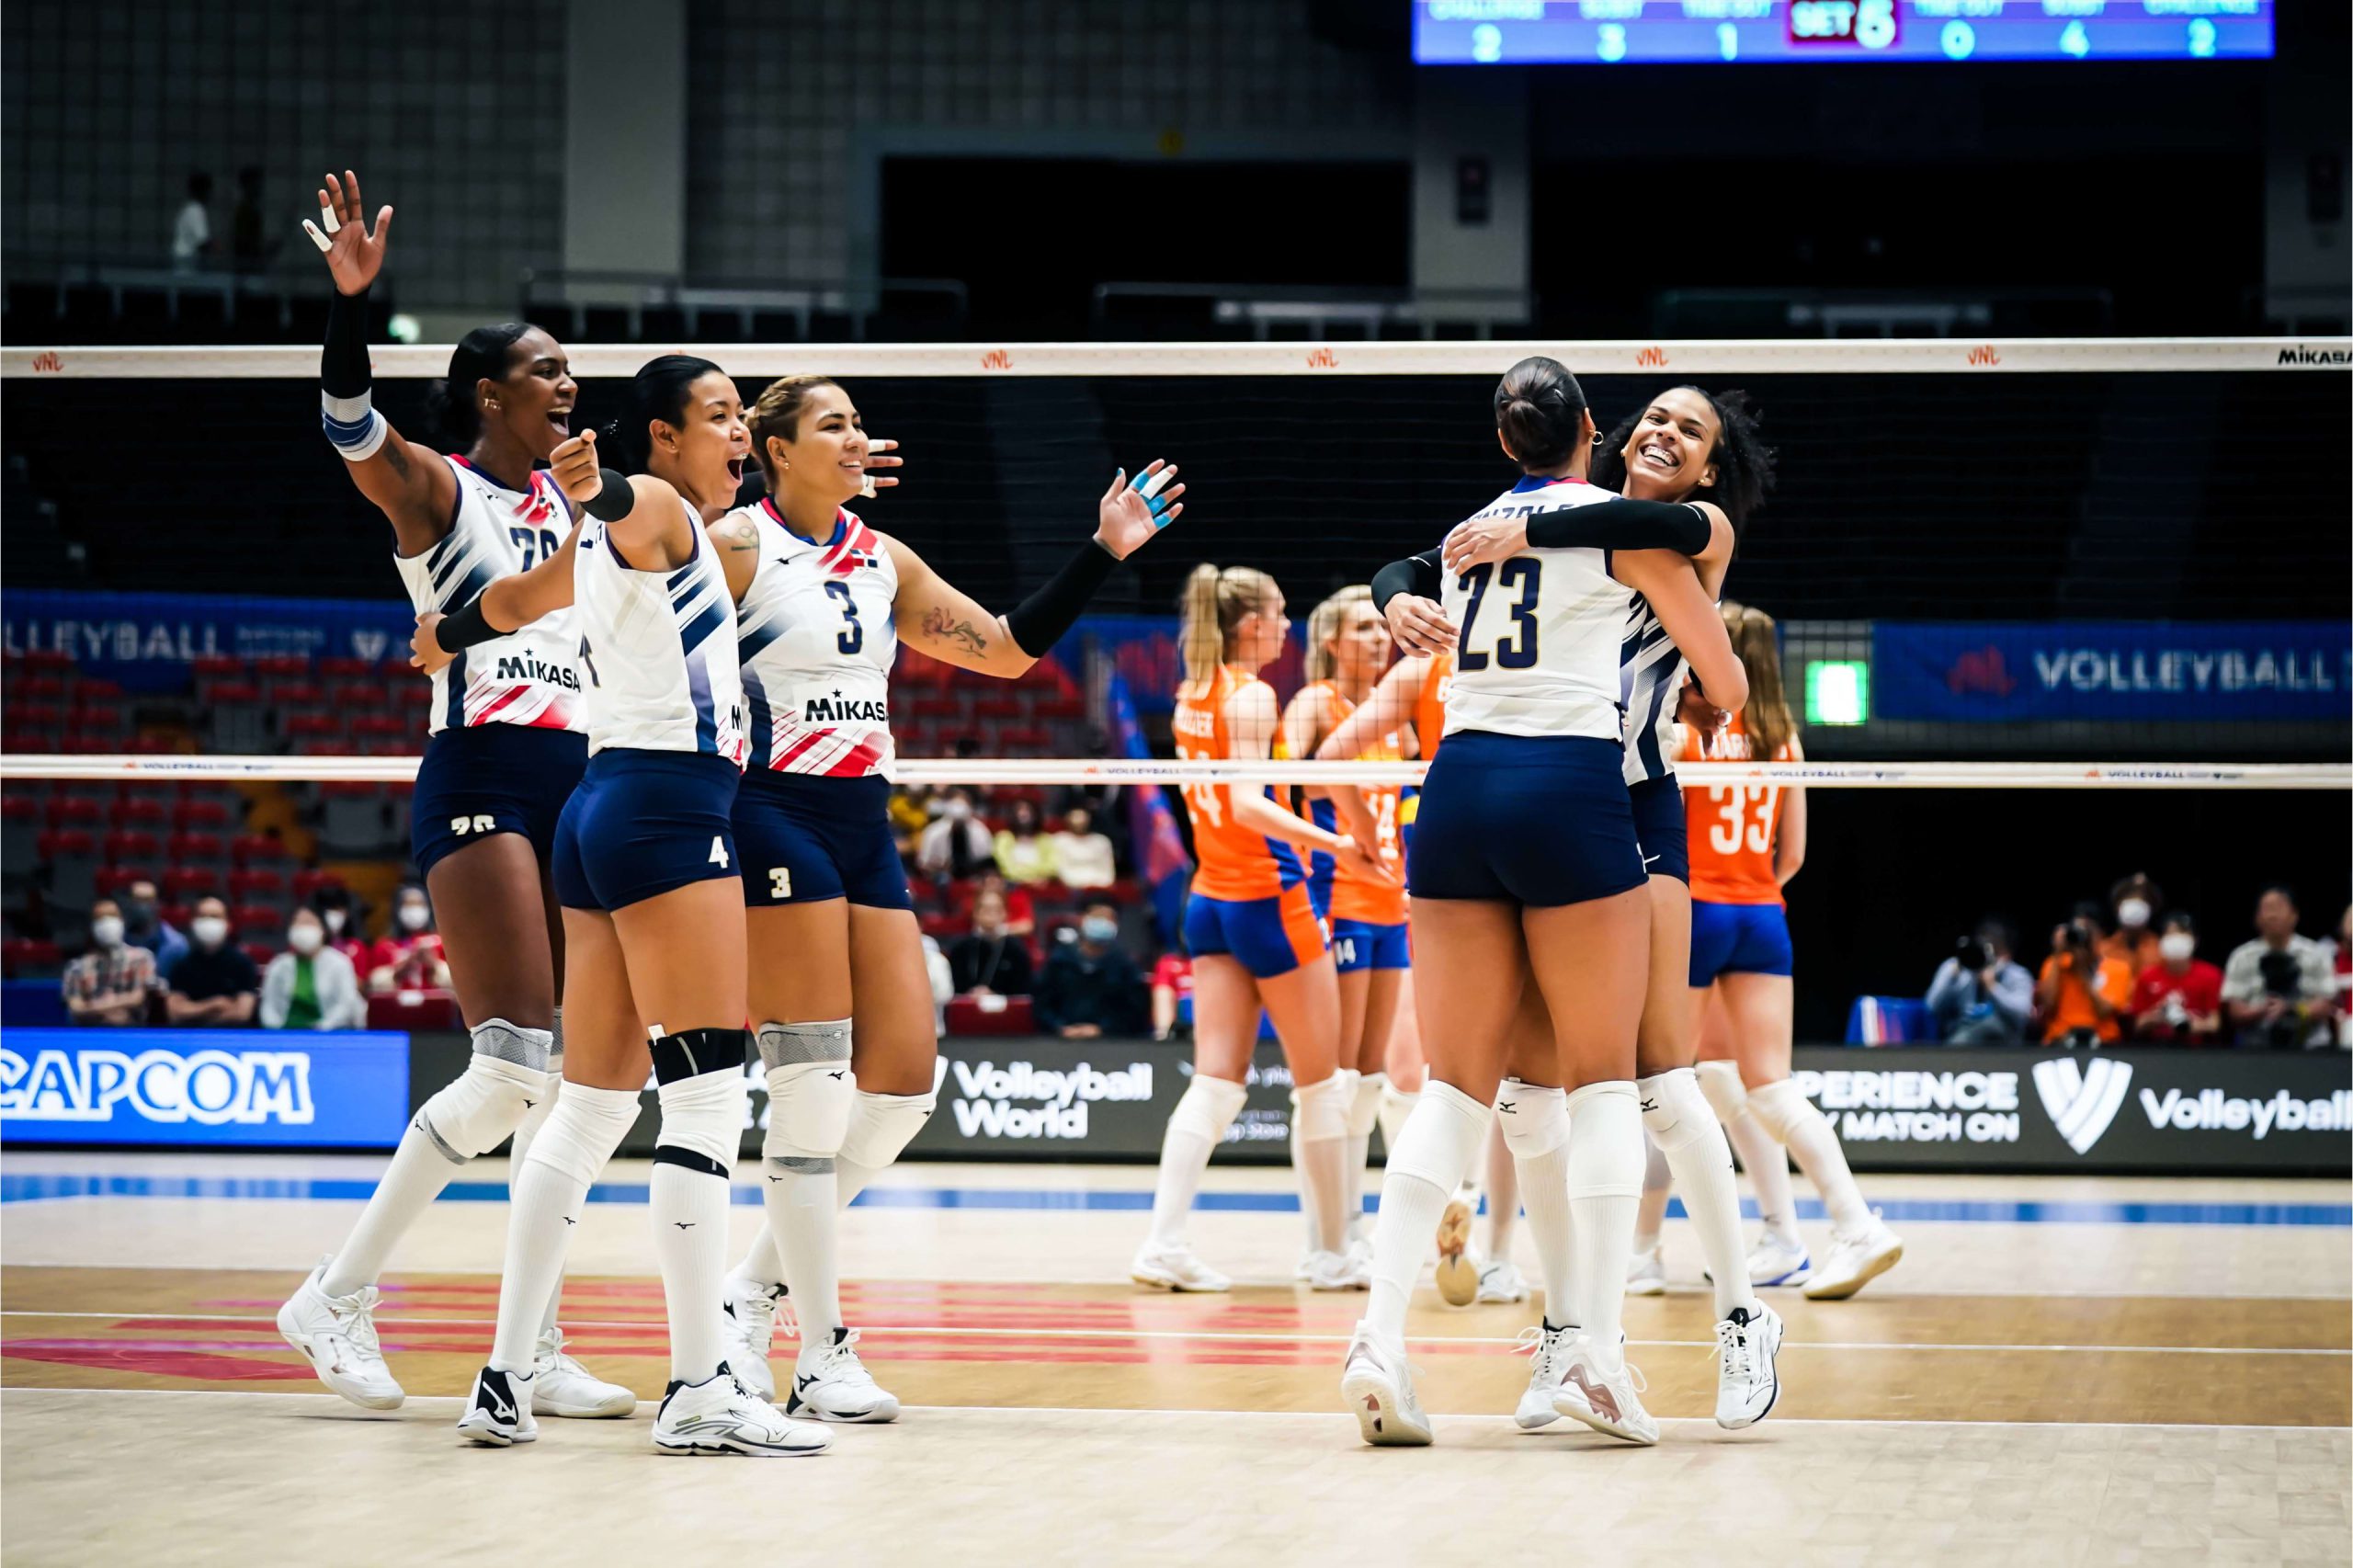 Dominican Republic wins another thrilling five-setter